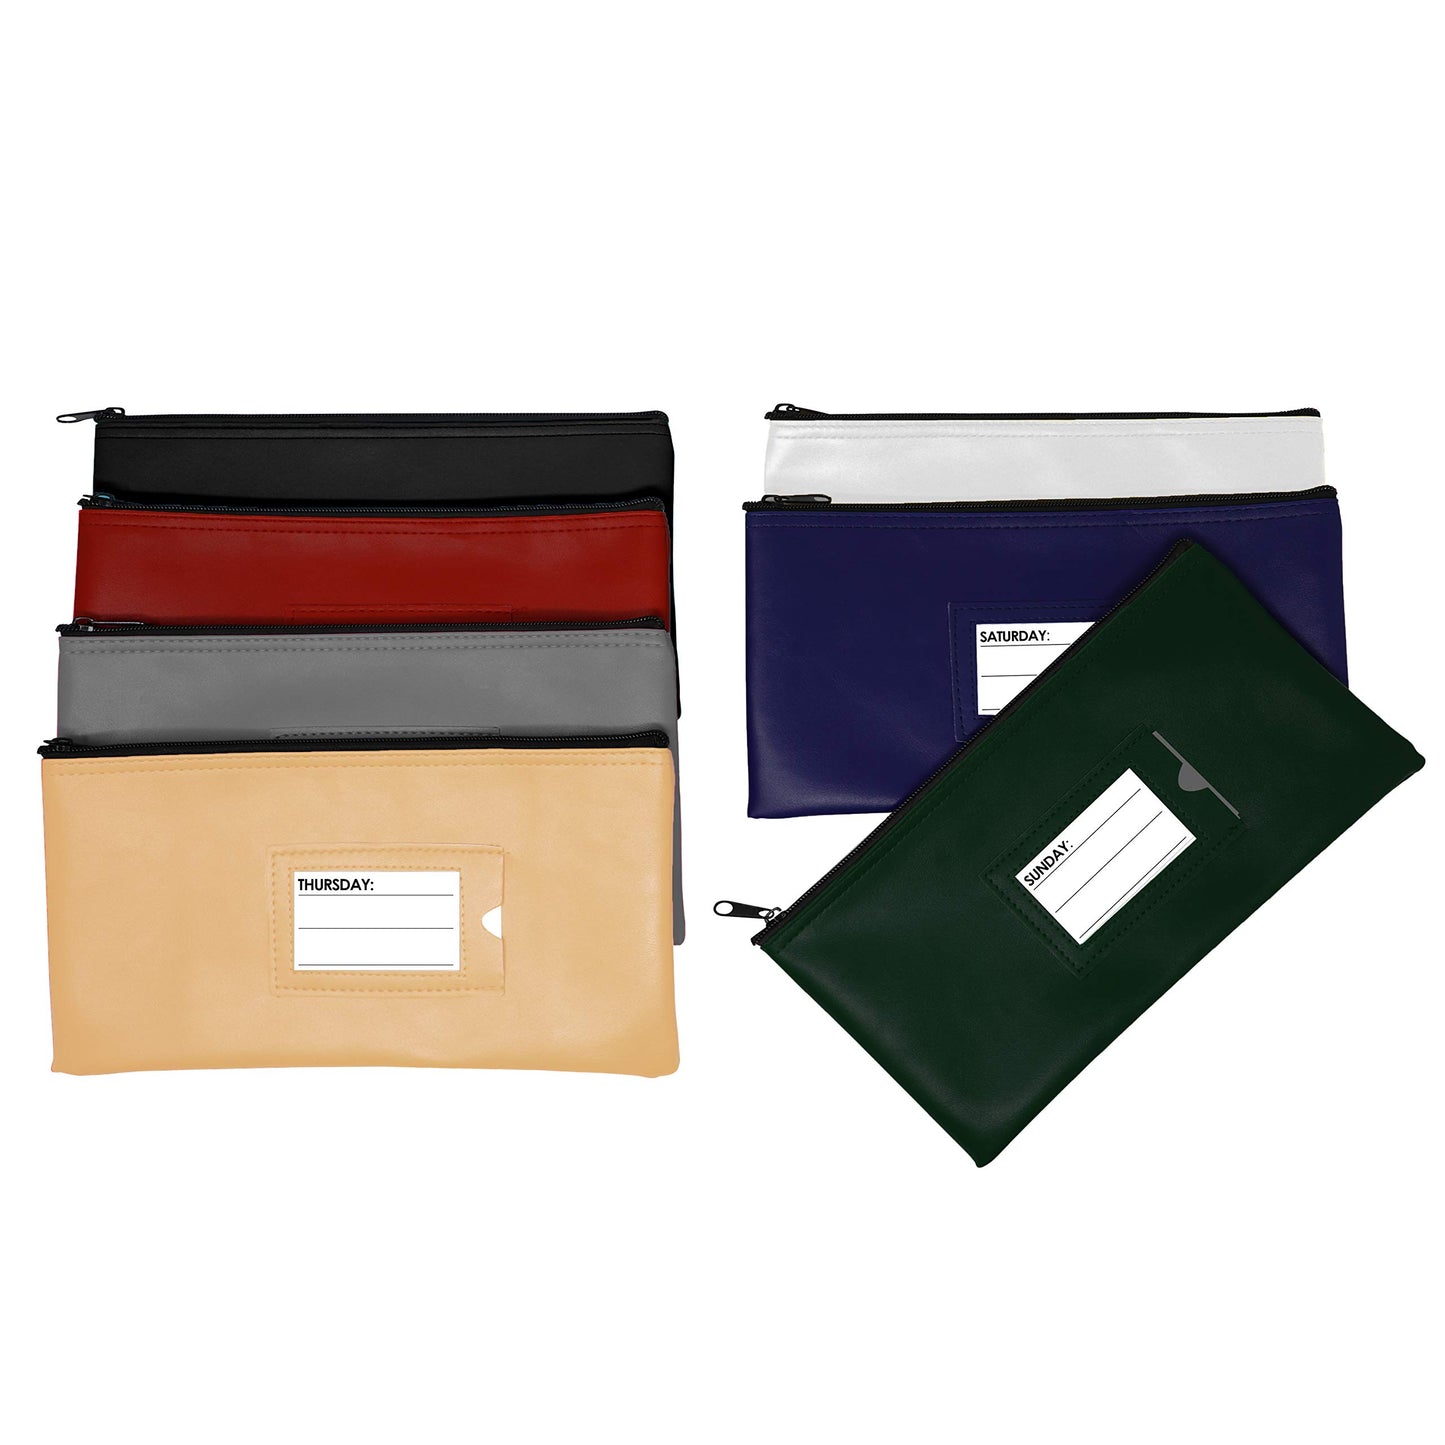 Multicolor 7 Days Bank Deposit Cash and Coin Pouches, Multicolor